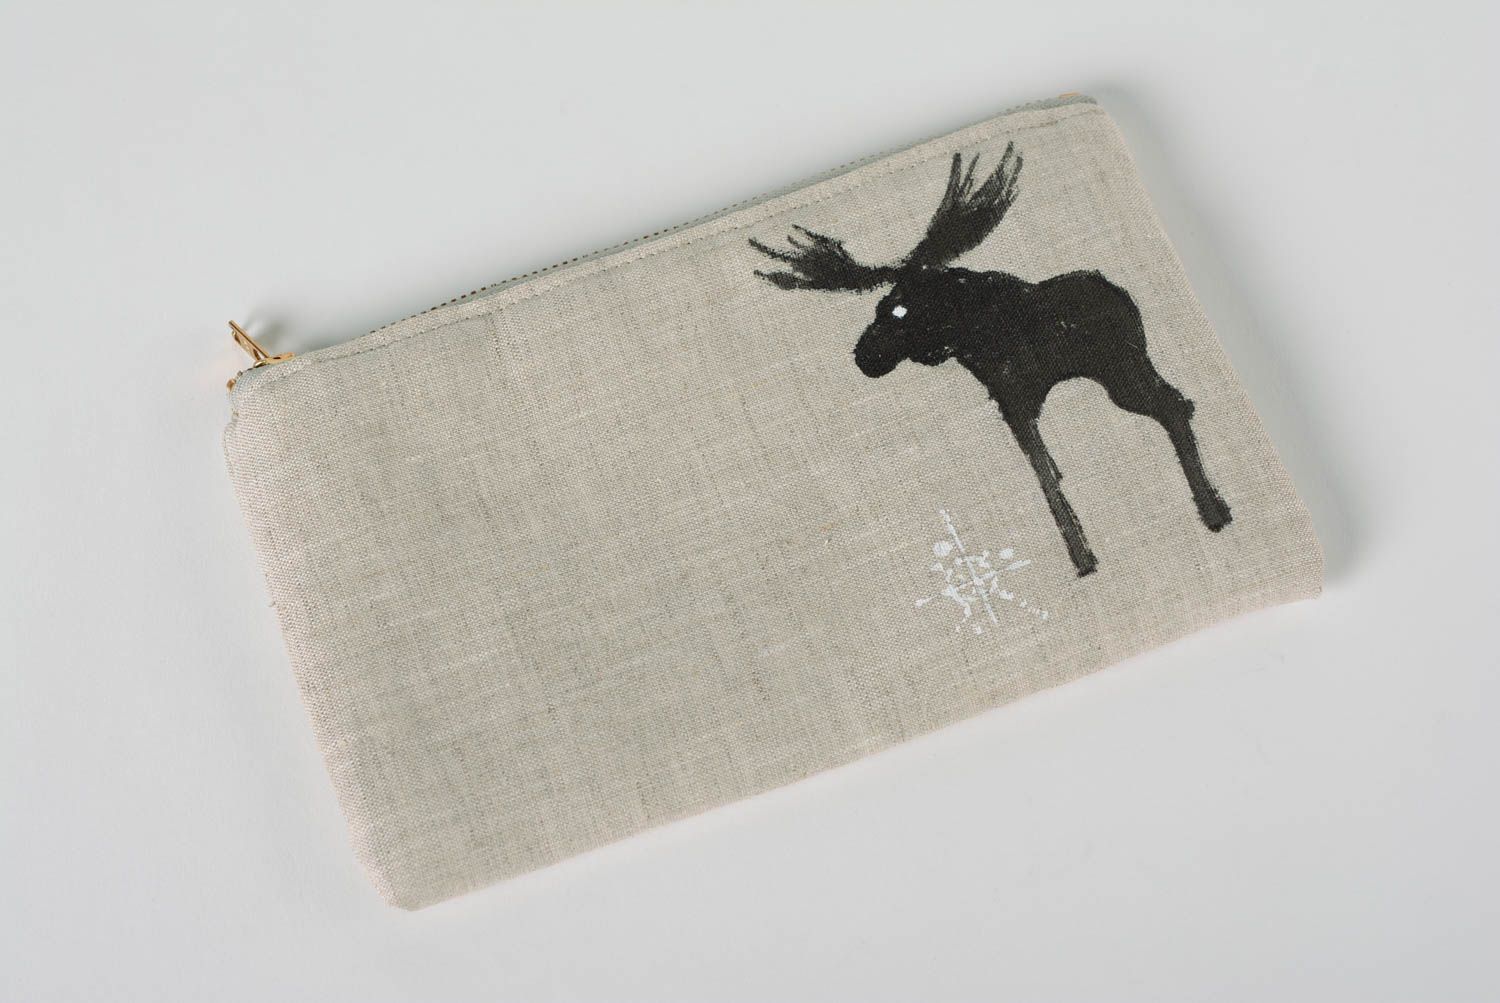 Handmade cosmetic bag sewn of gray linen fabric with zipper and elk image photo 1